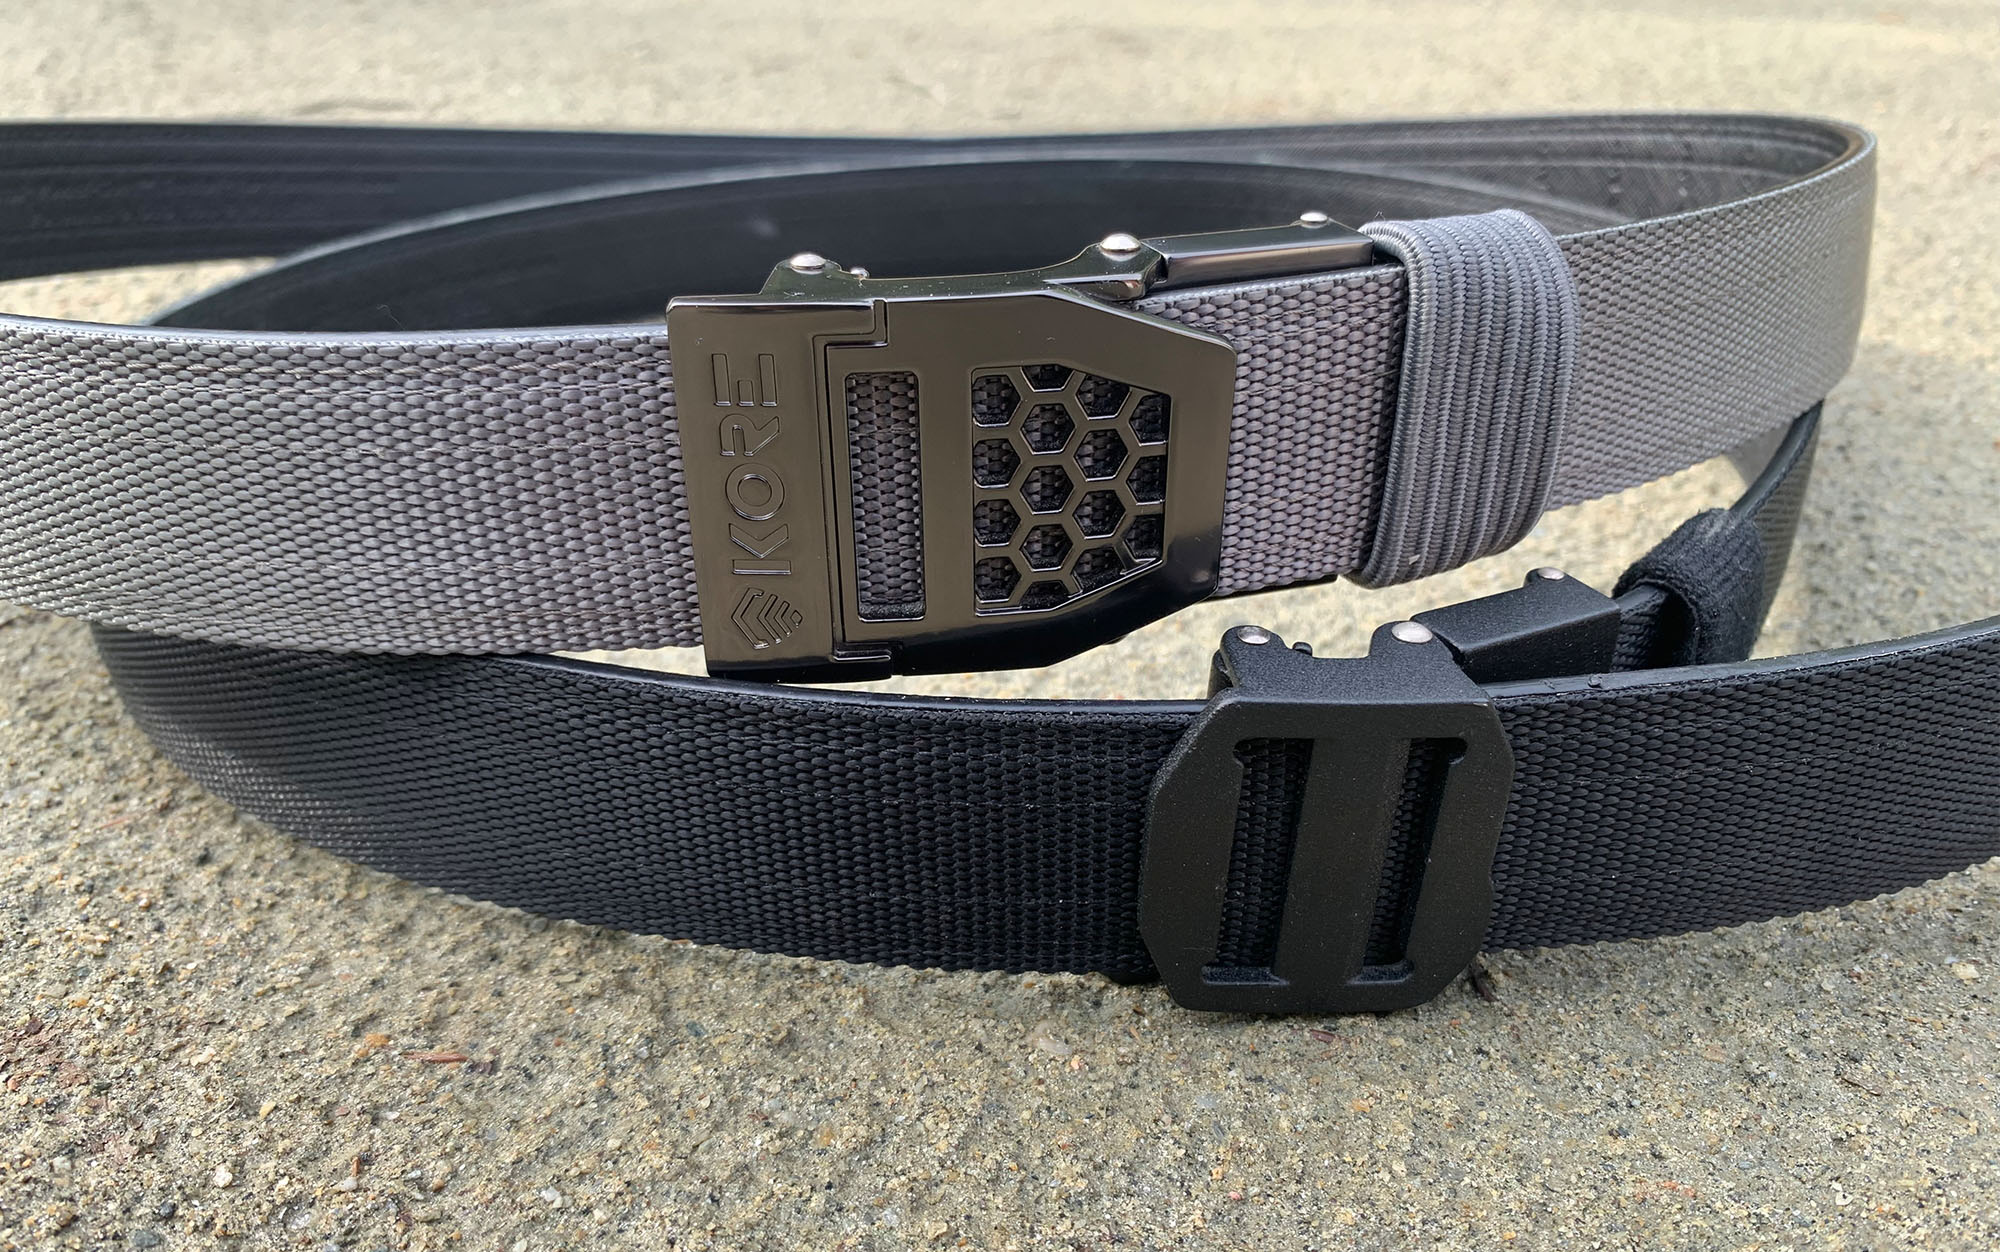 Kore gun belts are best for concealed carry.